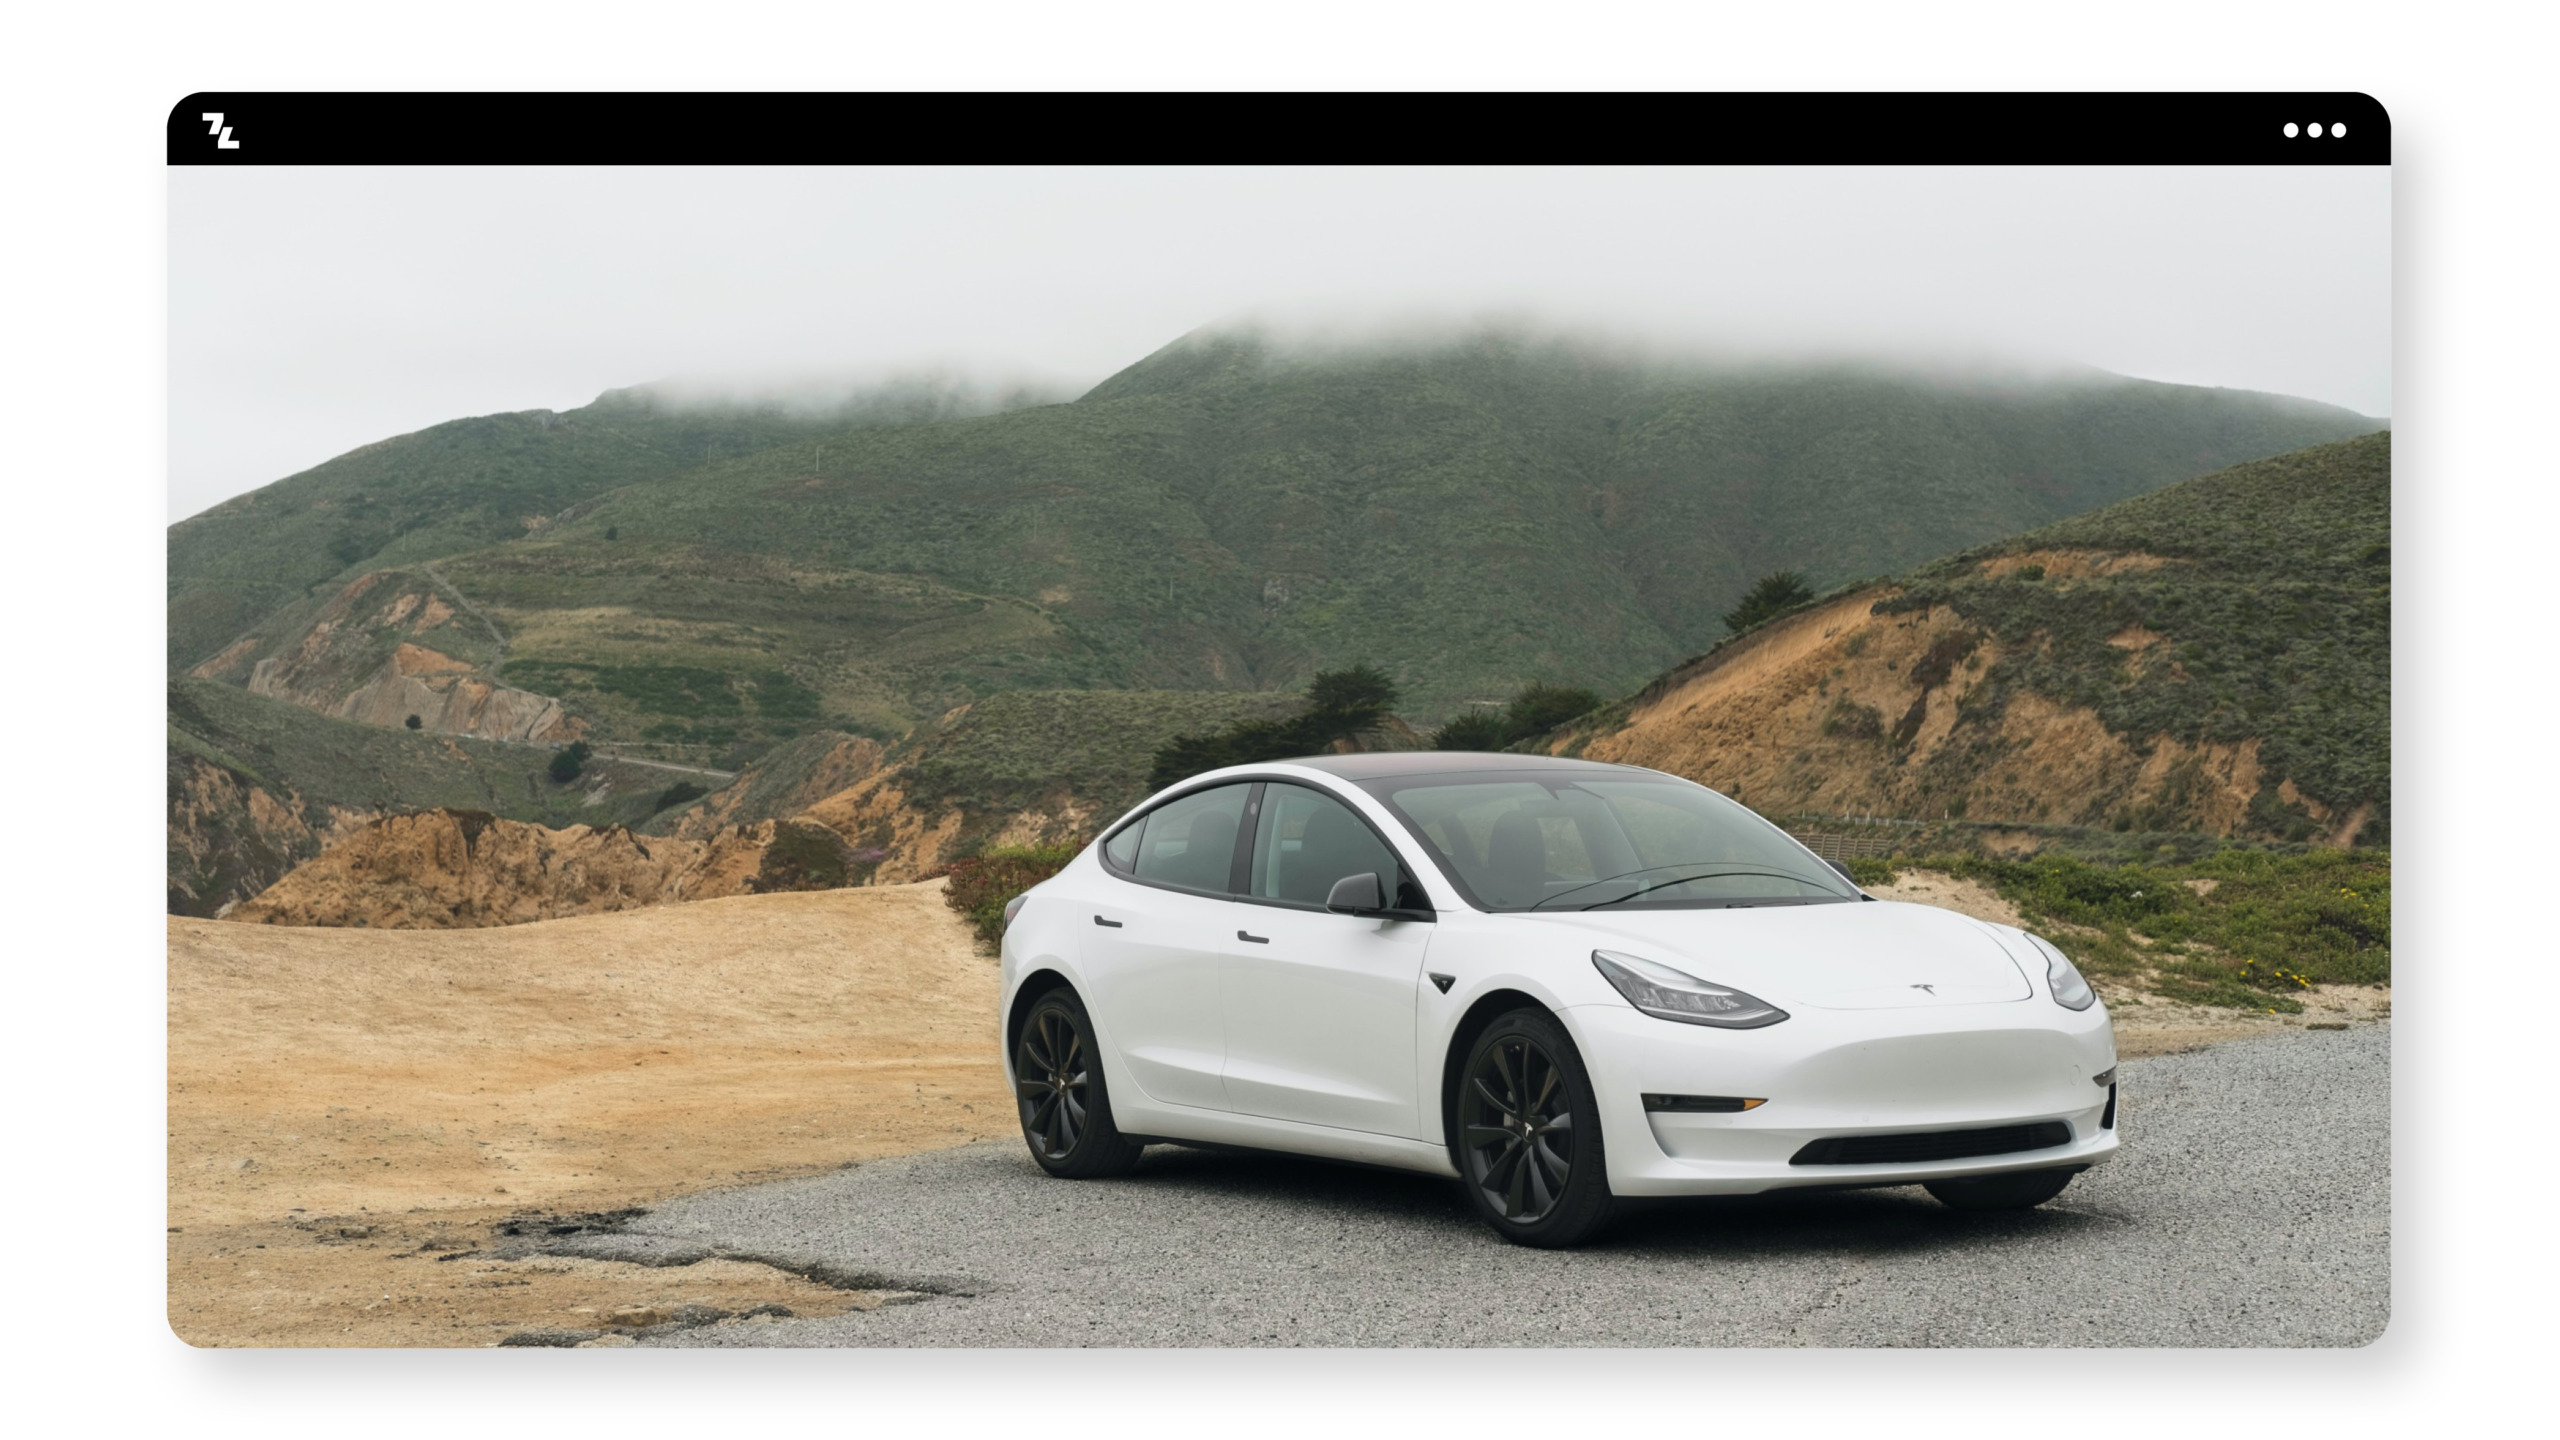 A white tesla model s parked on a mountain road.